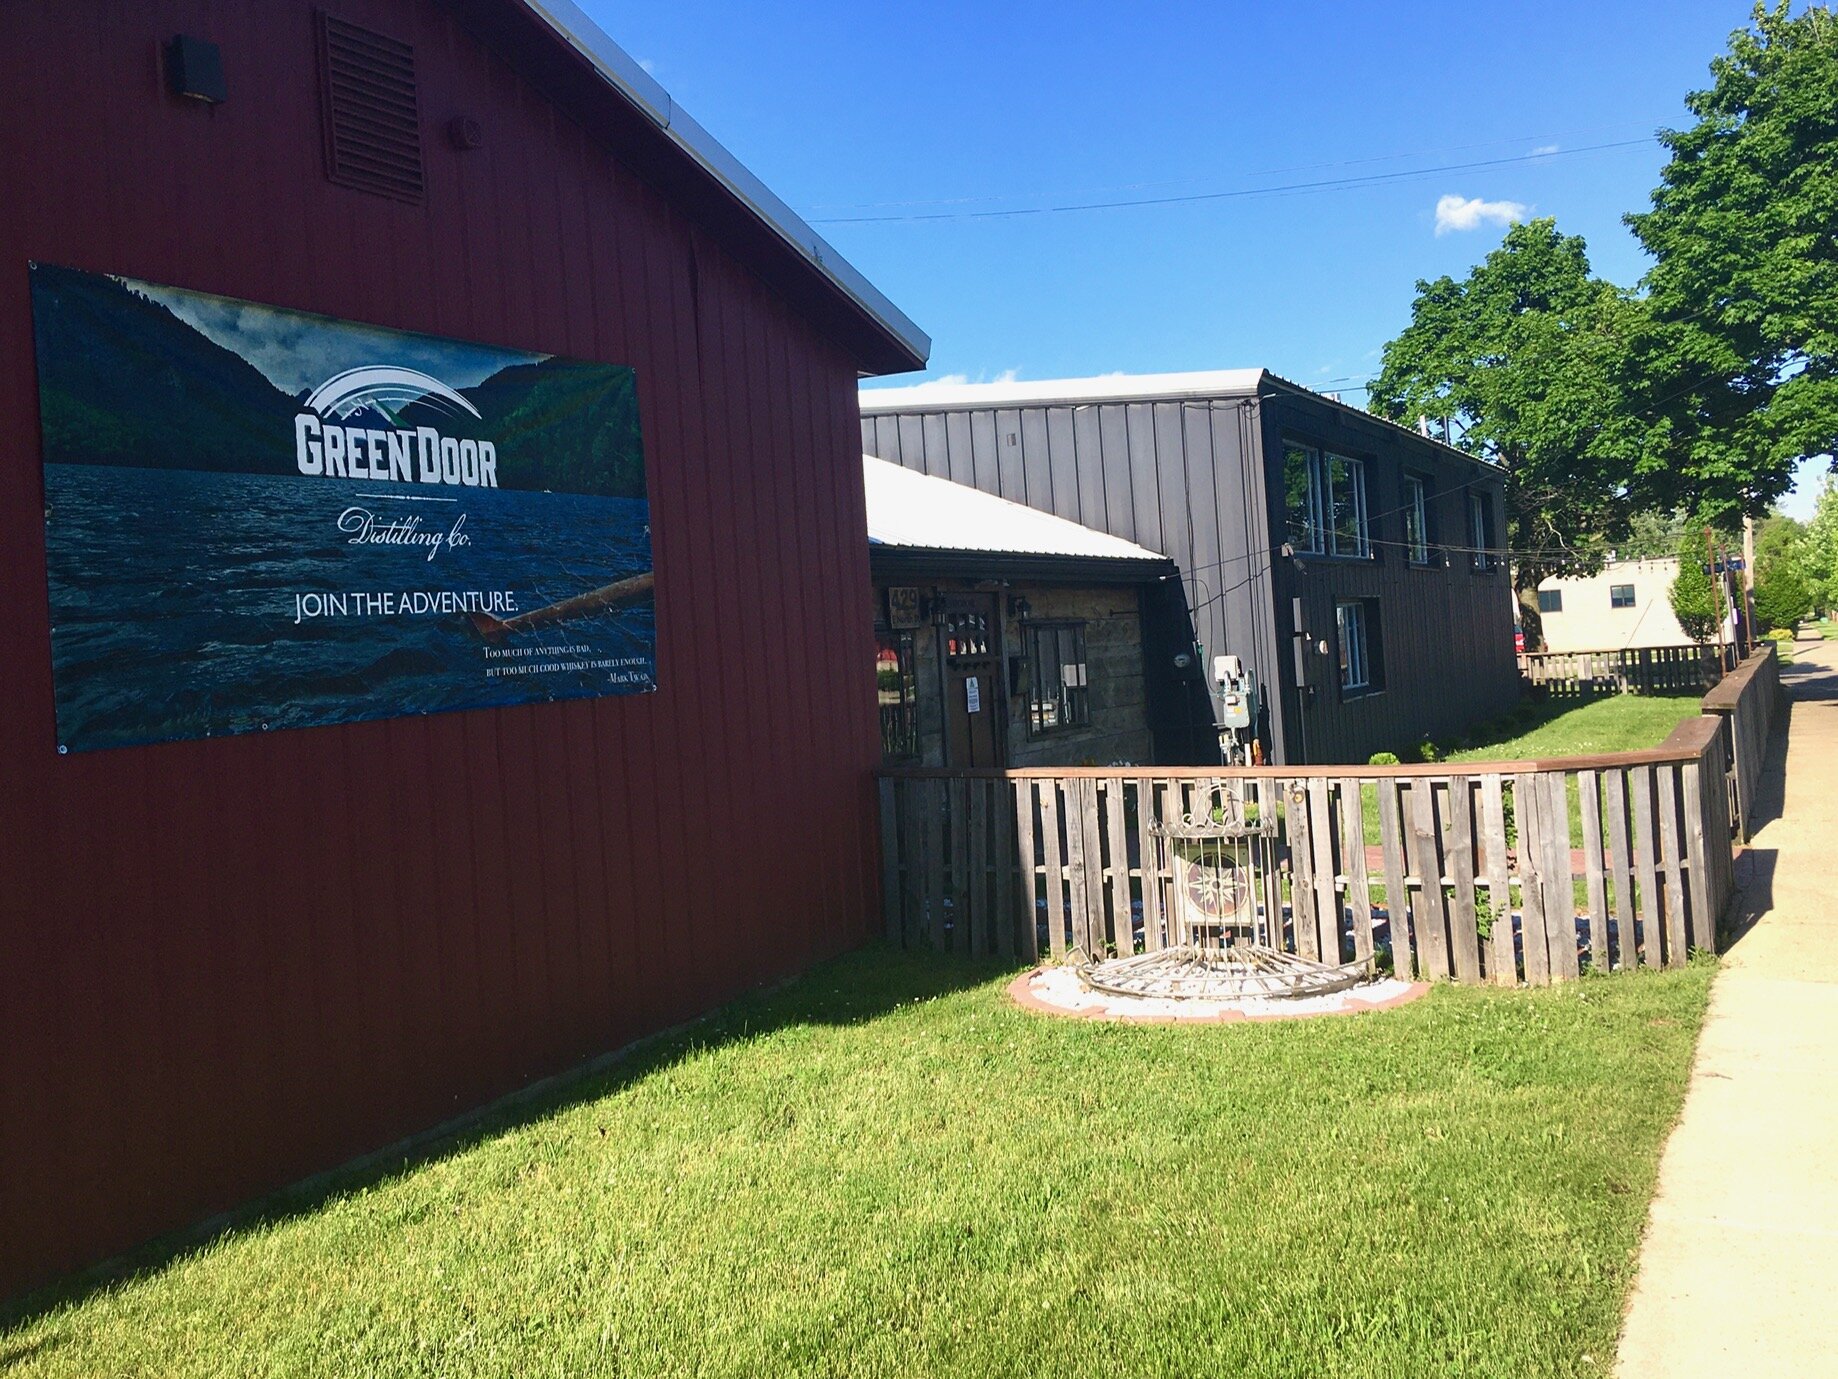 Green Door Distilling Co. is expanding the seating capacity of the greenspace just outside its 429 E. North St. location from about 25 to about 45. Tables are being placed more than six feet apart for proper social distancing.